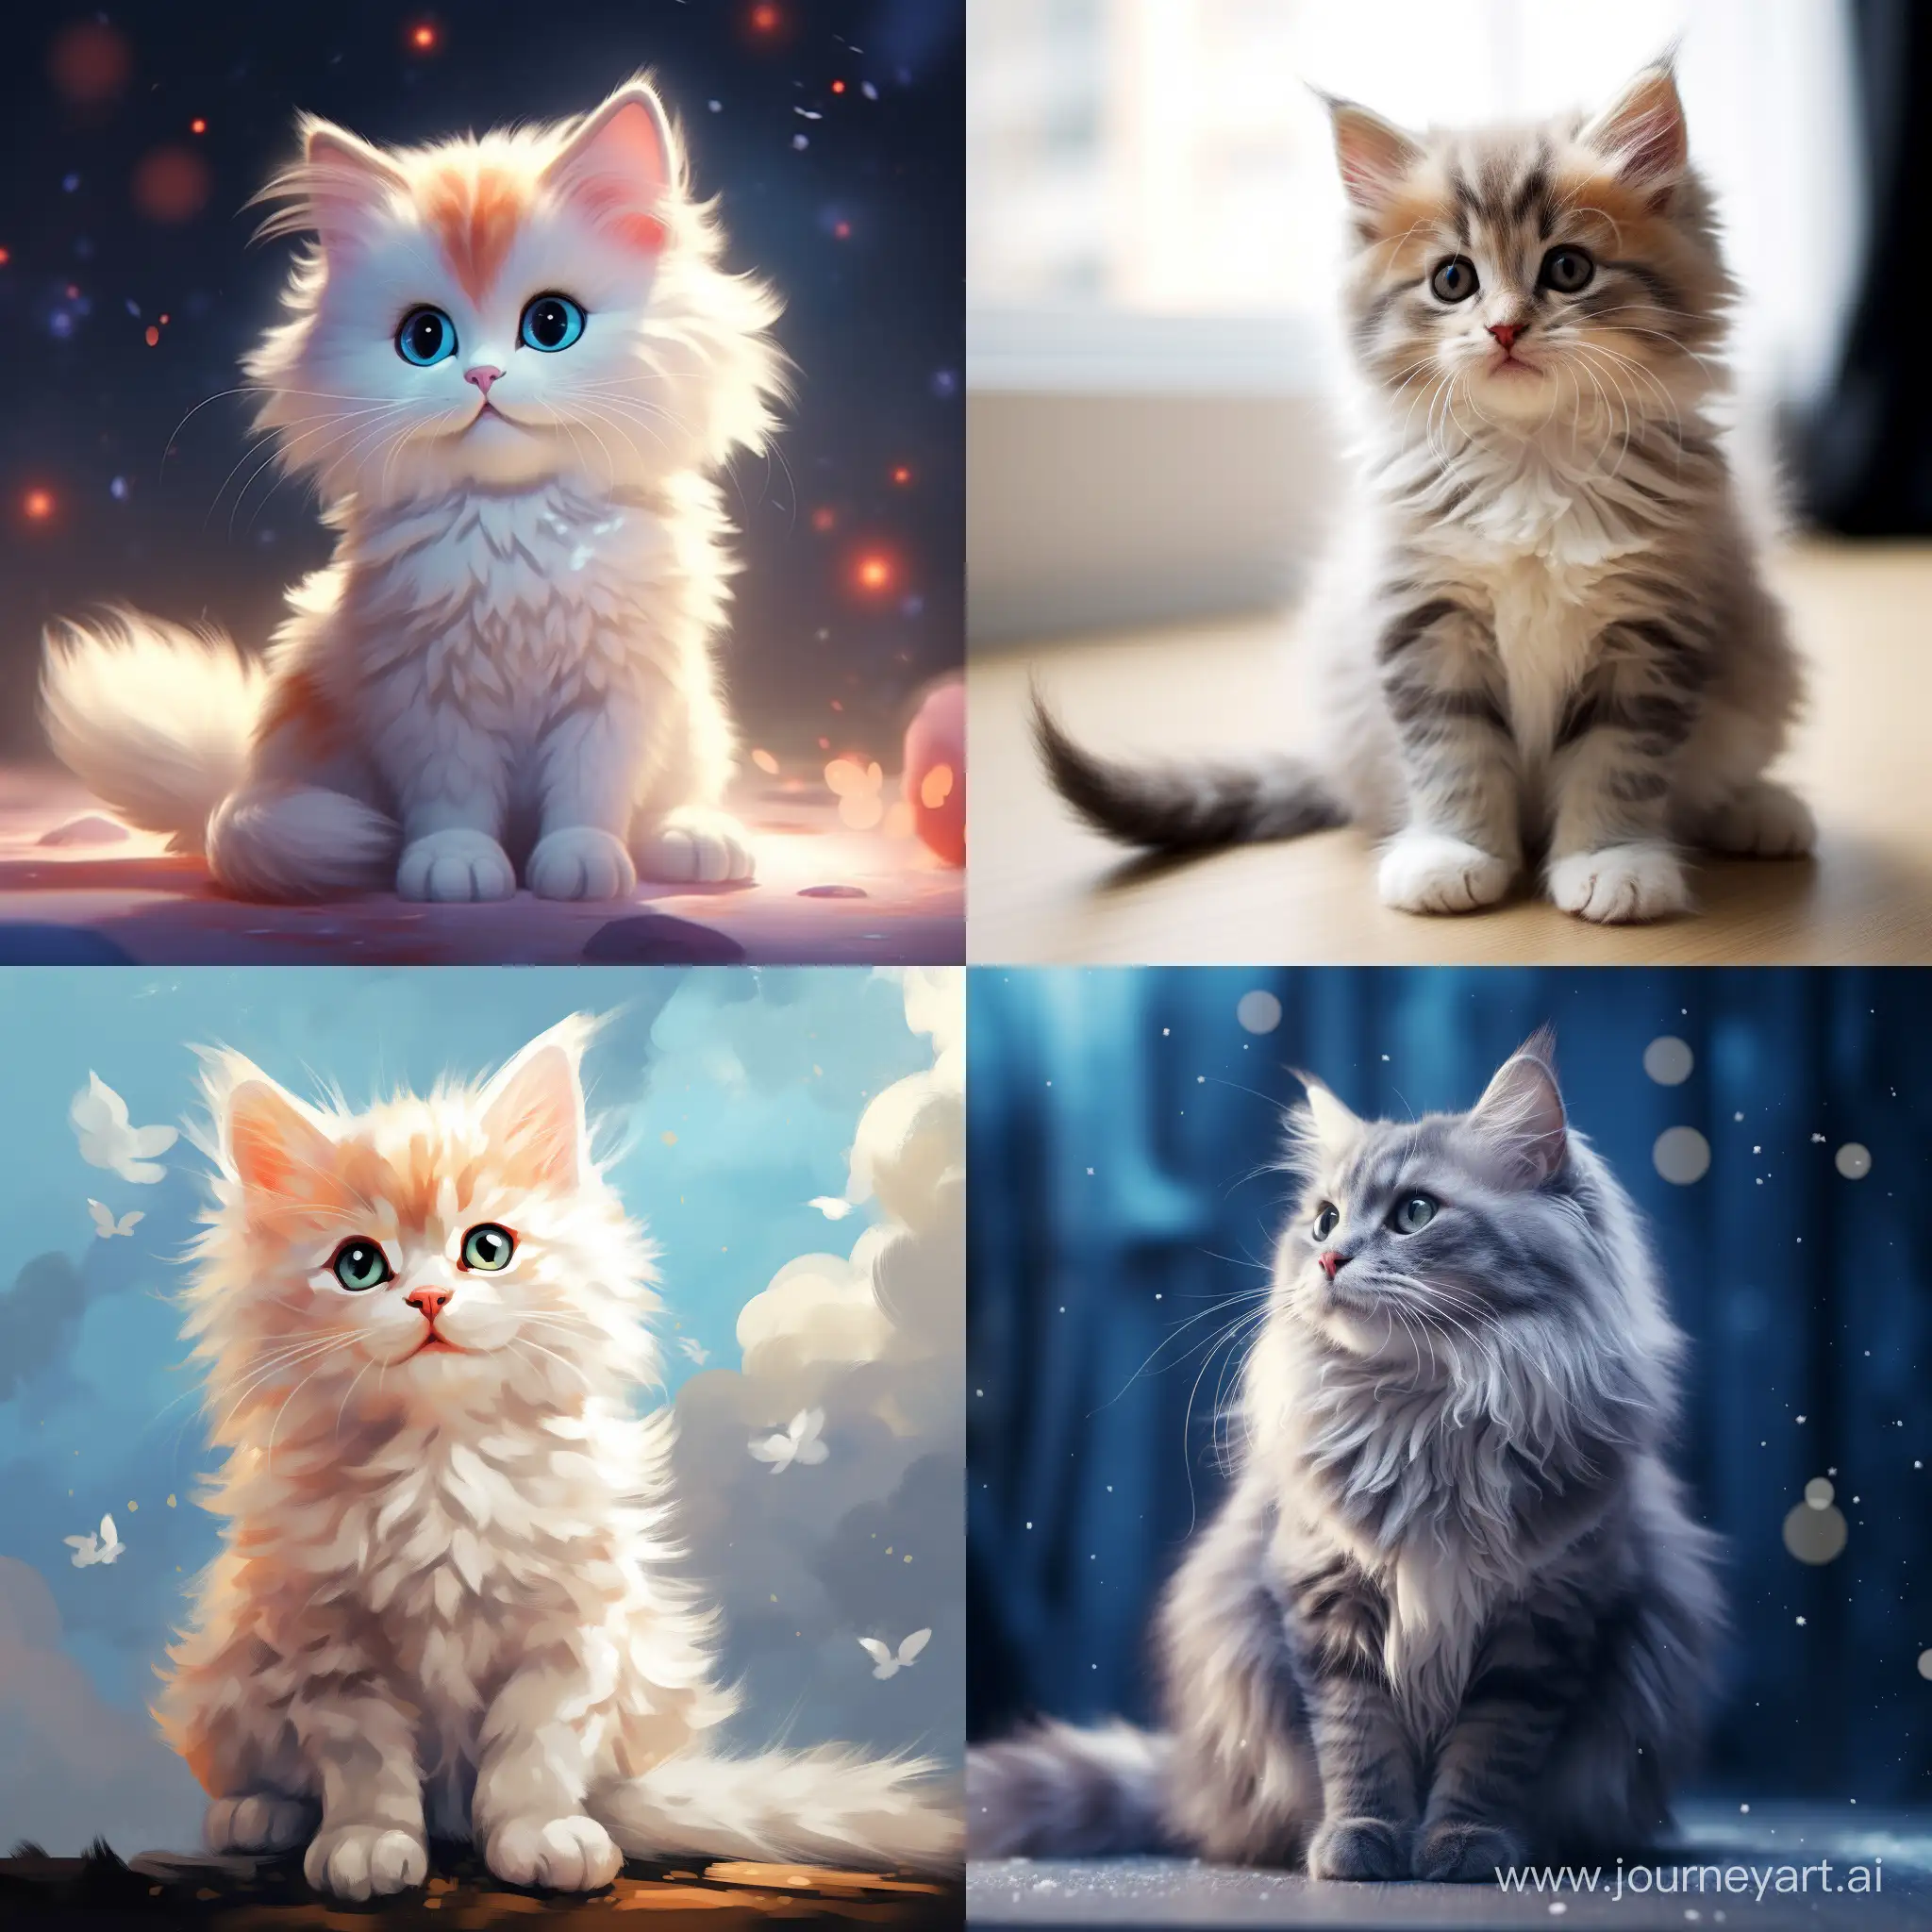 Image of a fluffy cute cat